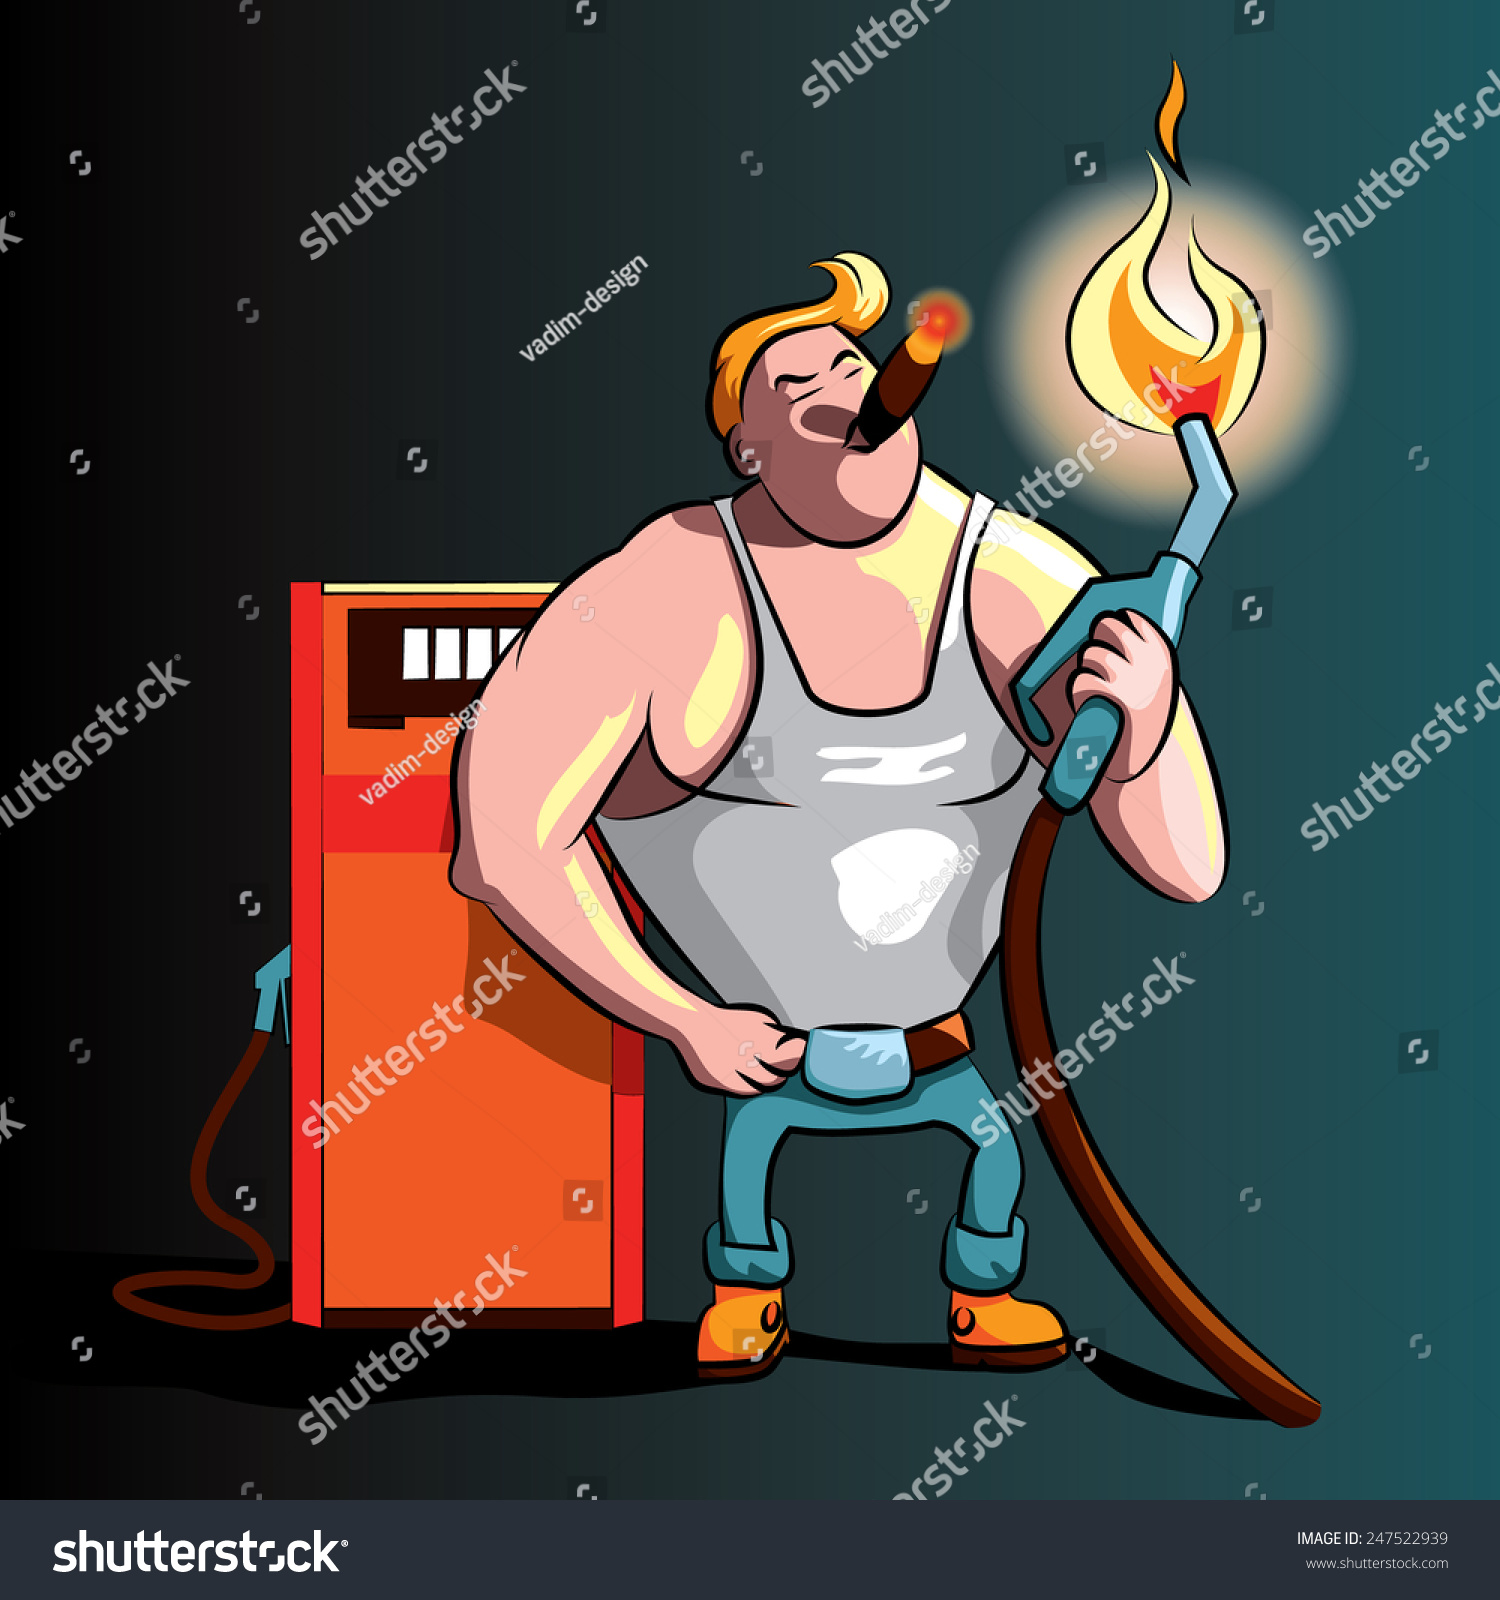 SVG of Refueling worker vector illustration, smoking a cigar on the gas station at night svg